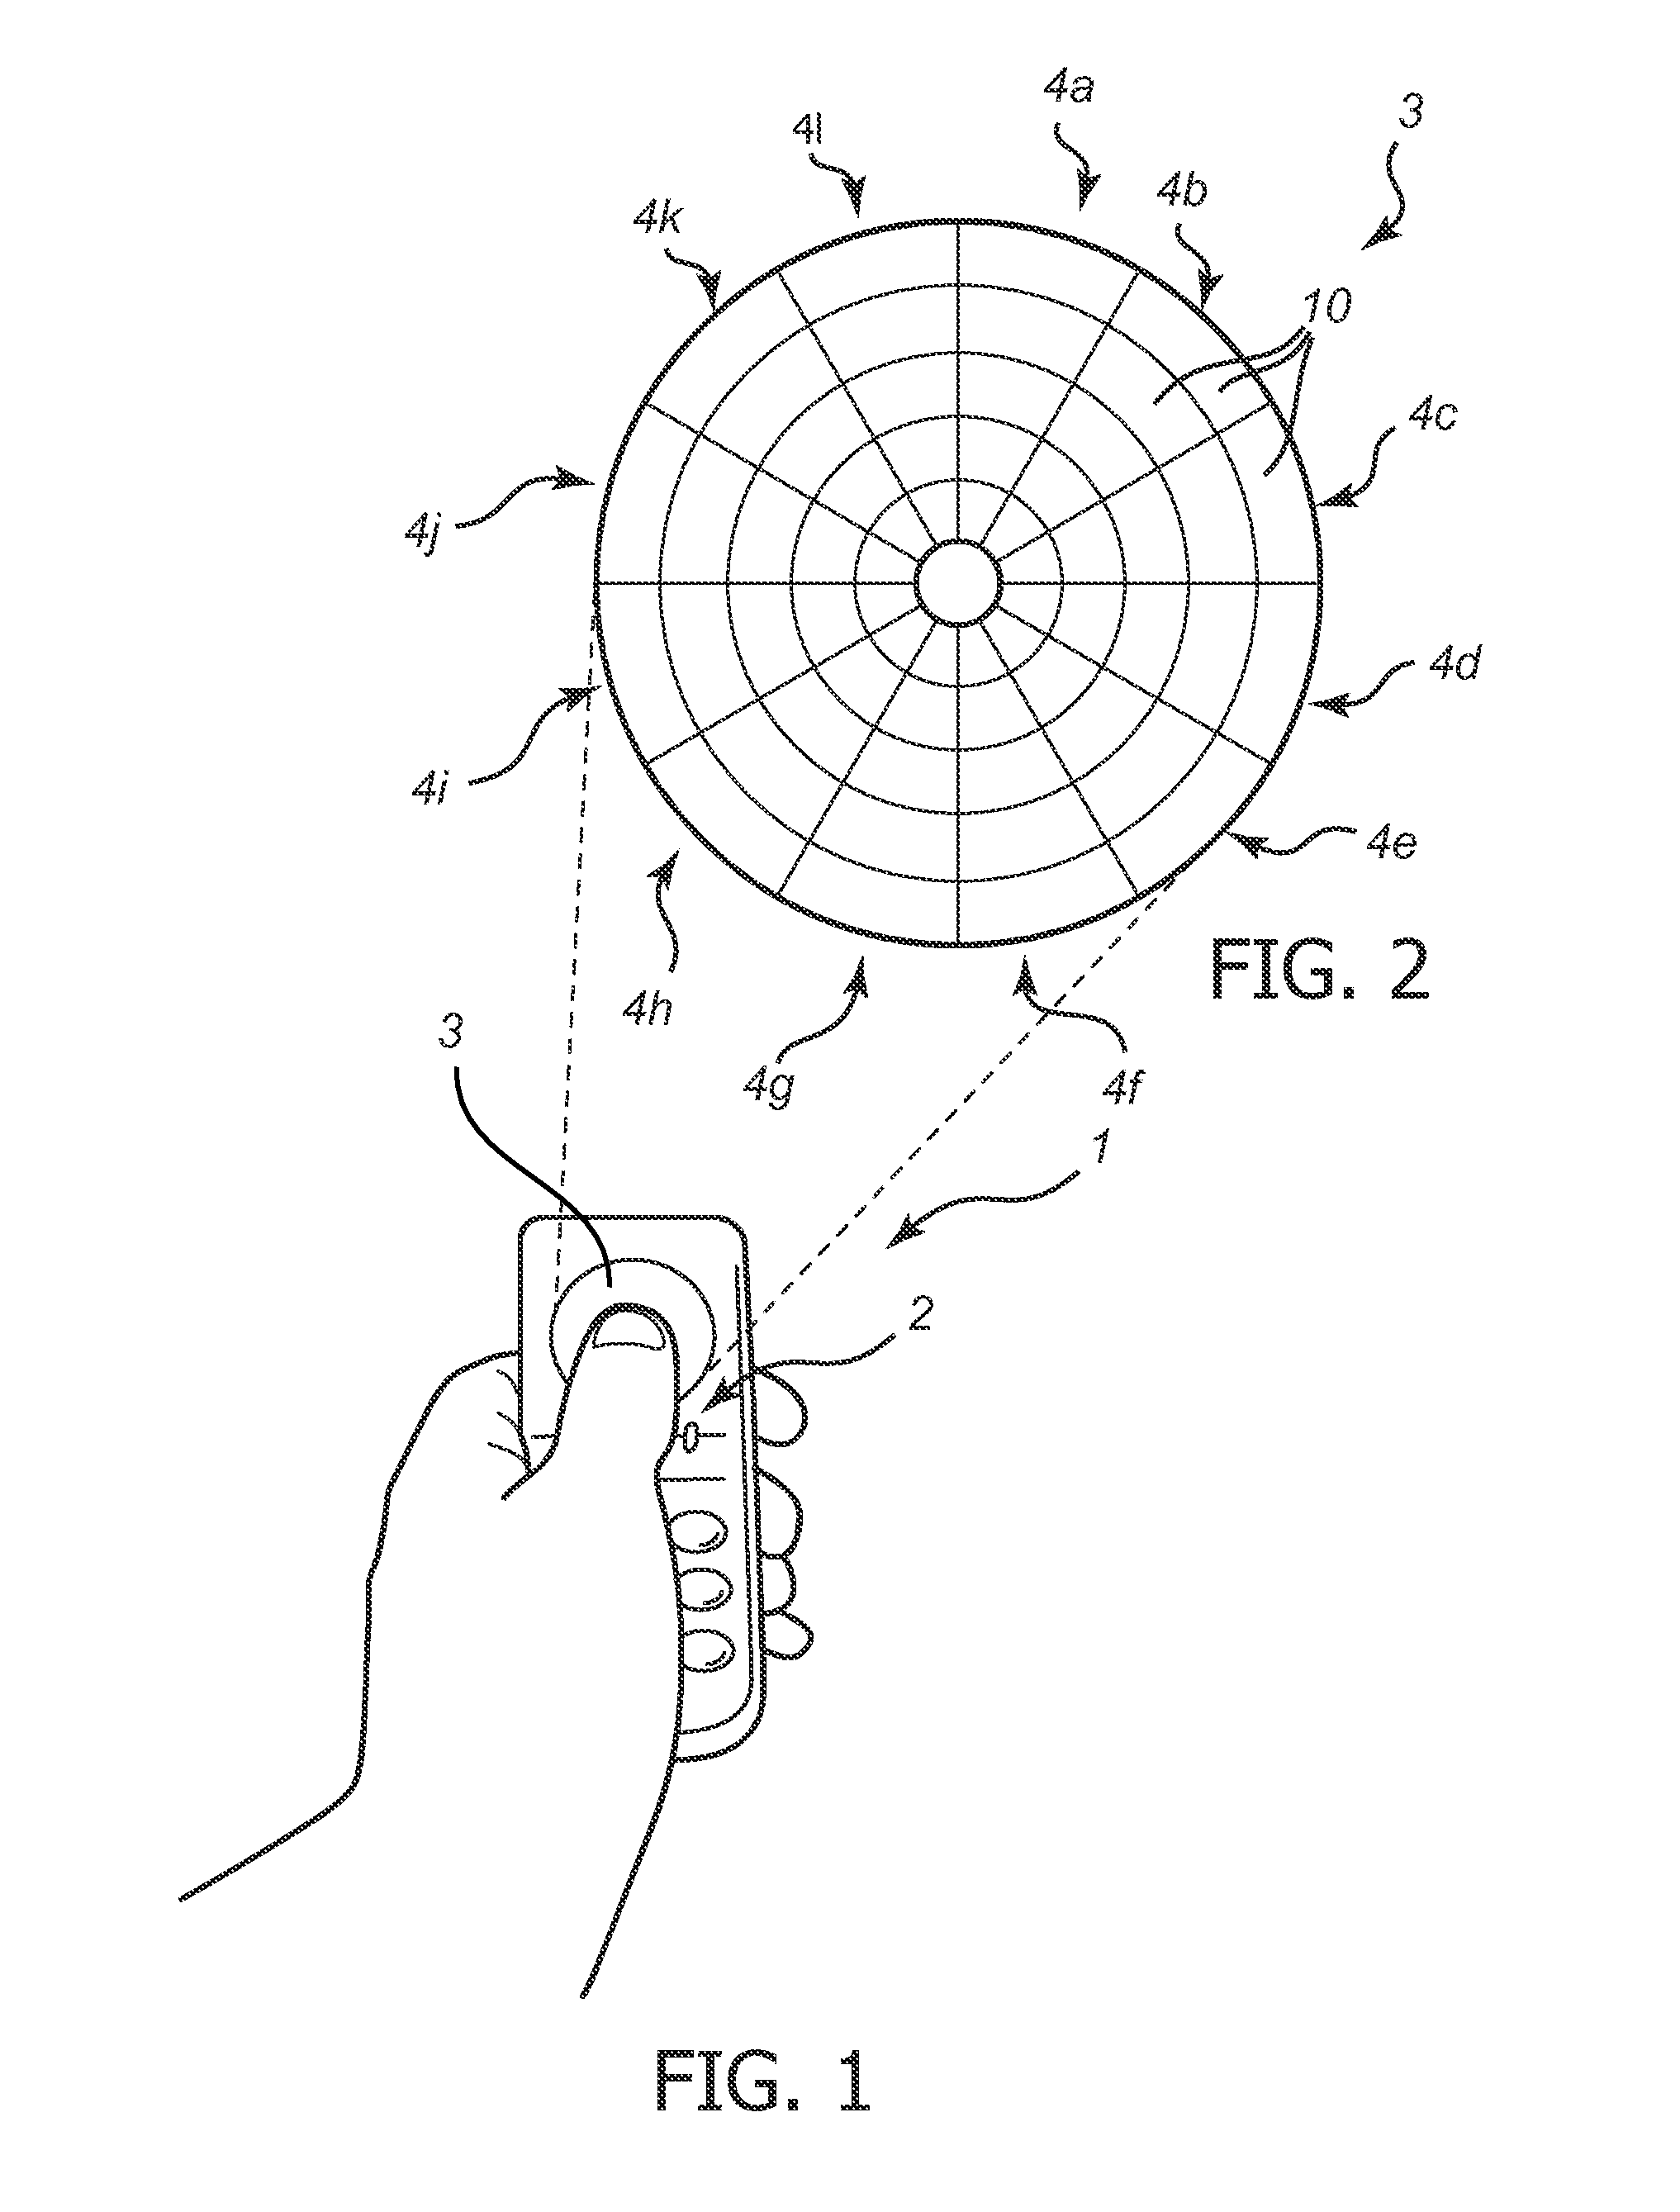 Controlling a color variation of a color adjustable illumination device